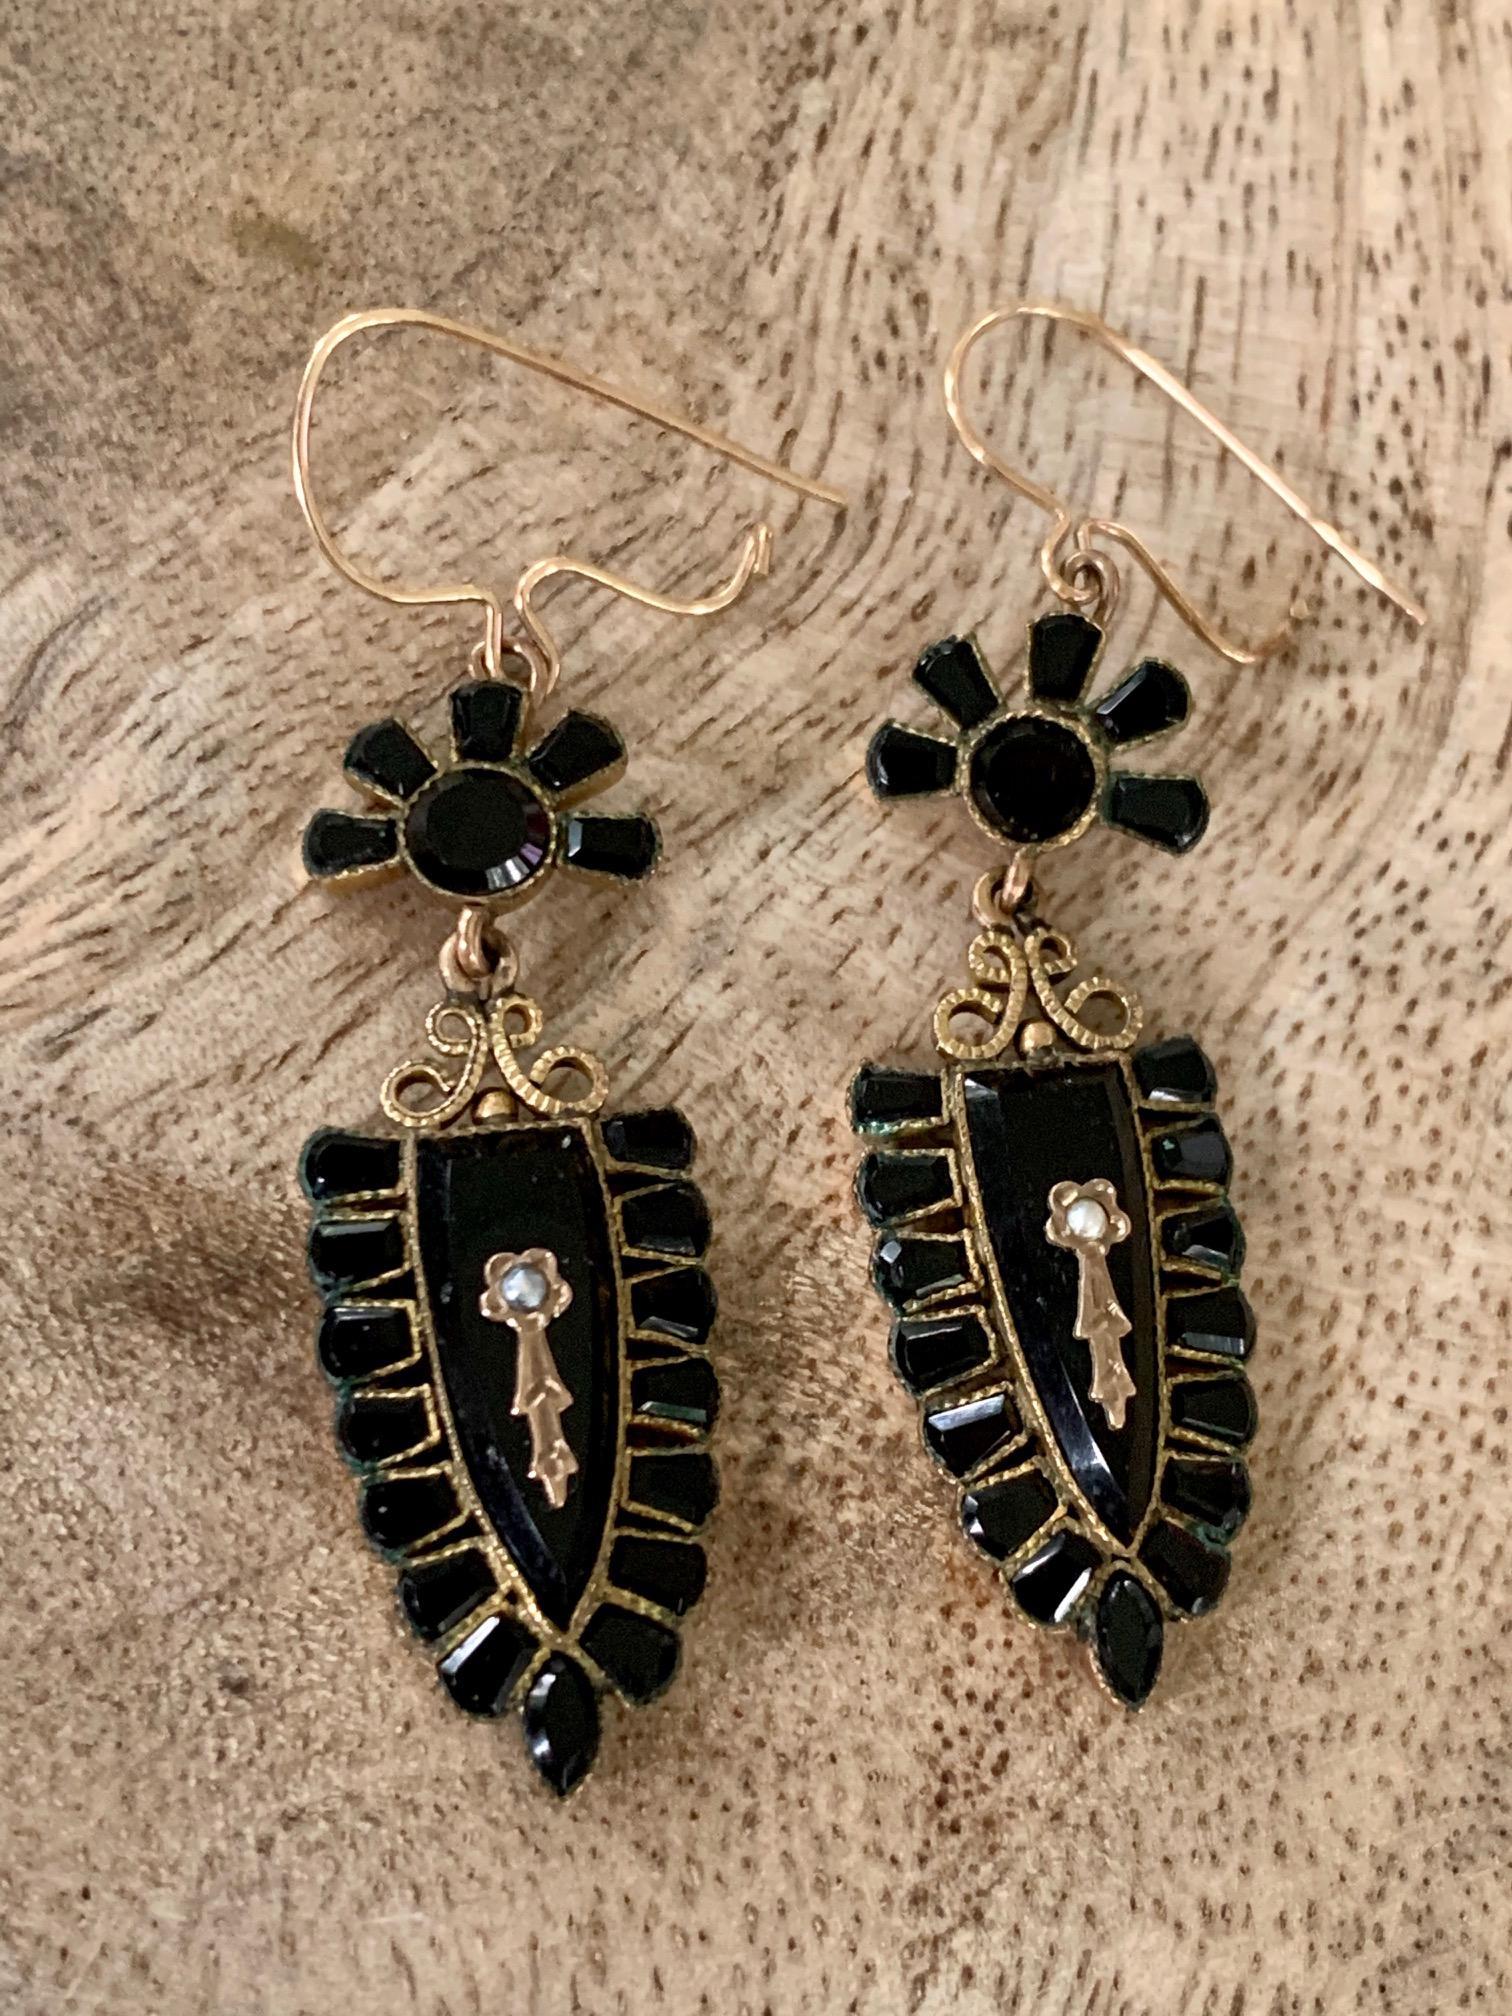 These beautiful dangle earrings feature black onyx stones of various sizes, along with seed Pearl accents.  

Weight:  4.35 grams
Length: 13 x 35mm
